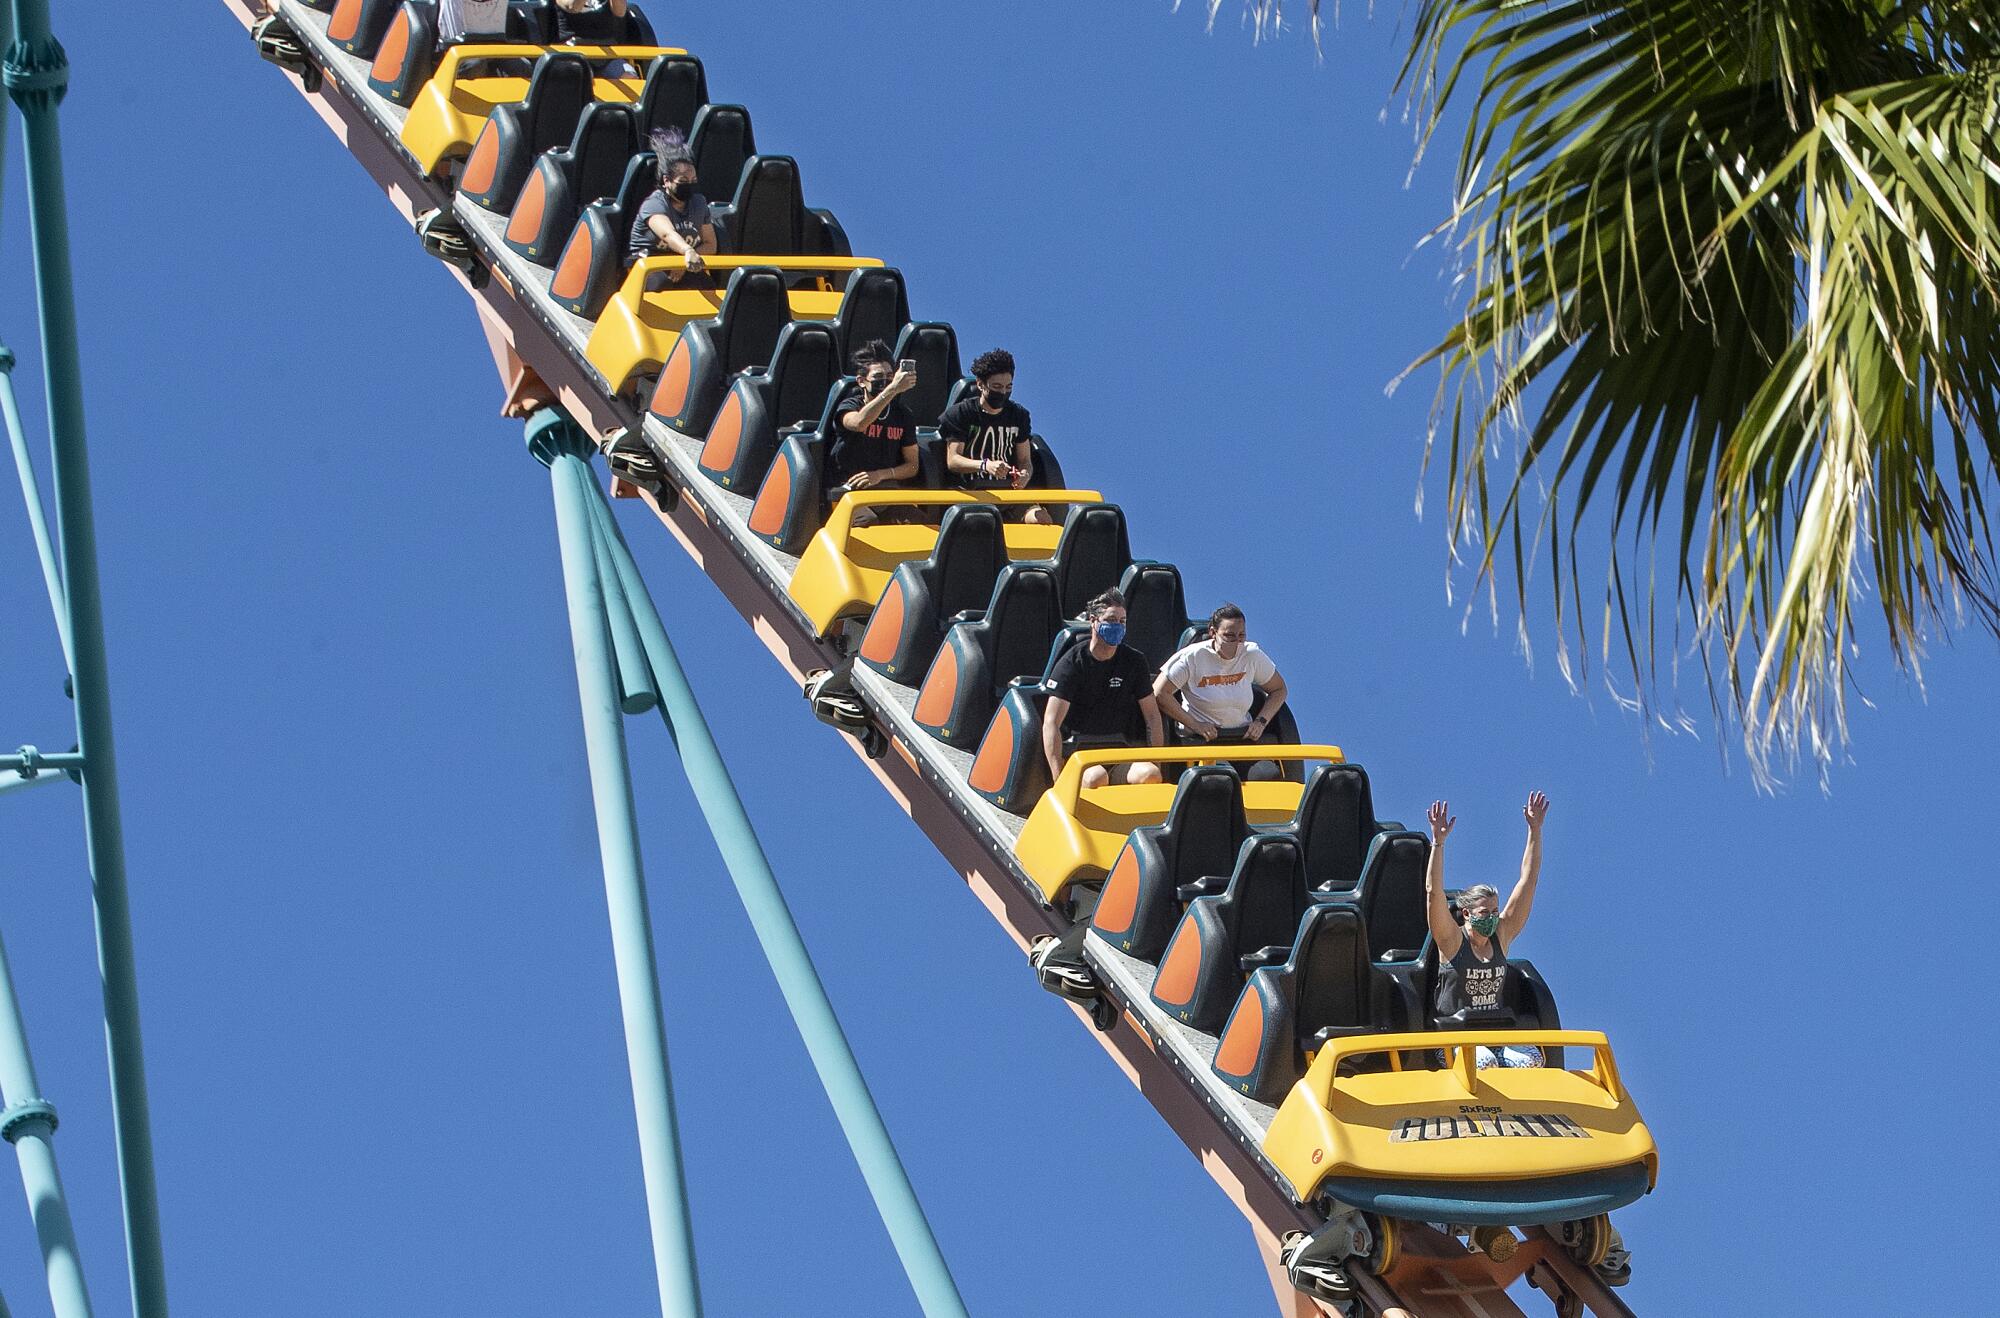 People ride the Goliath roller coaster at Six Flags Magic Mountain in Valencia.